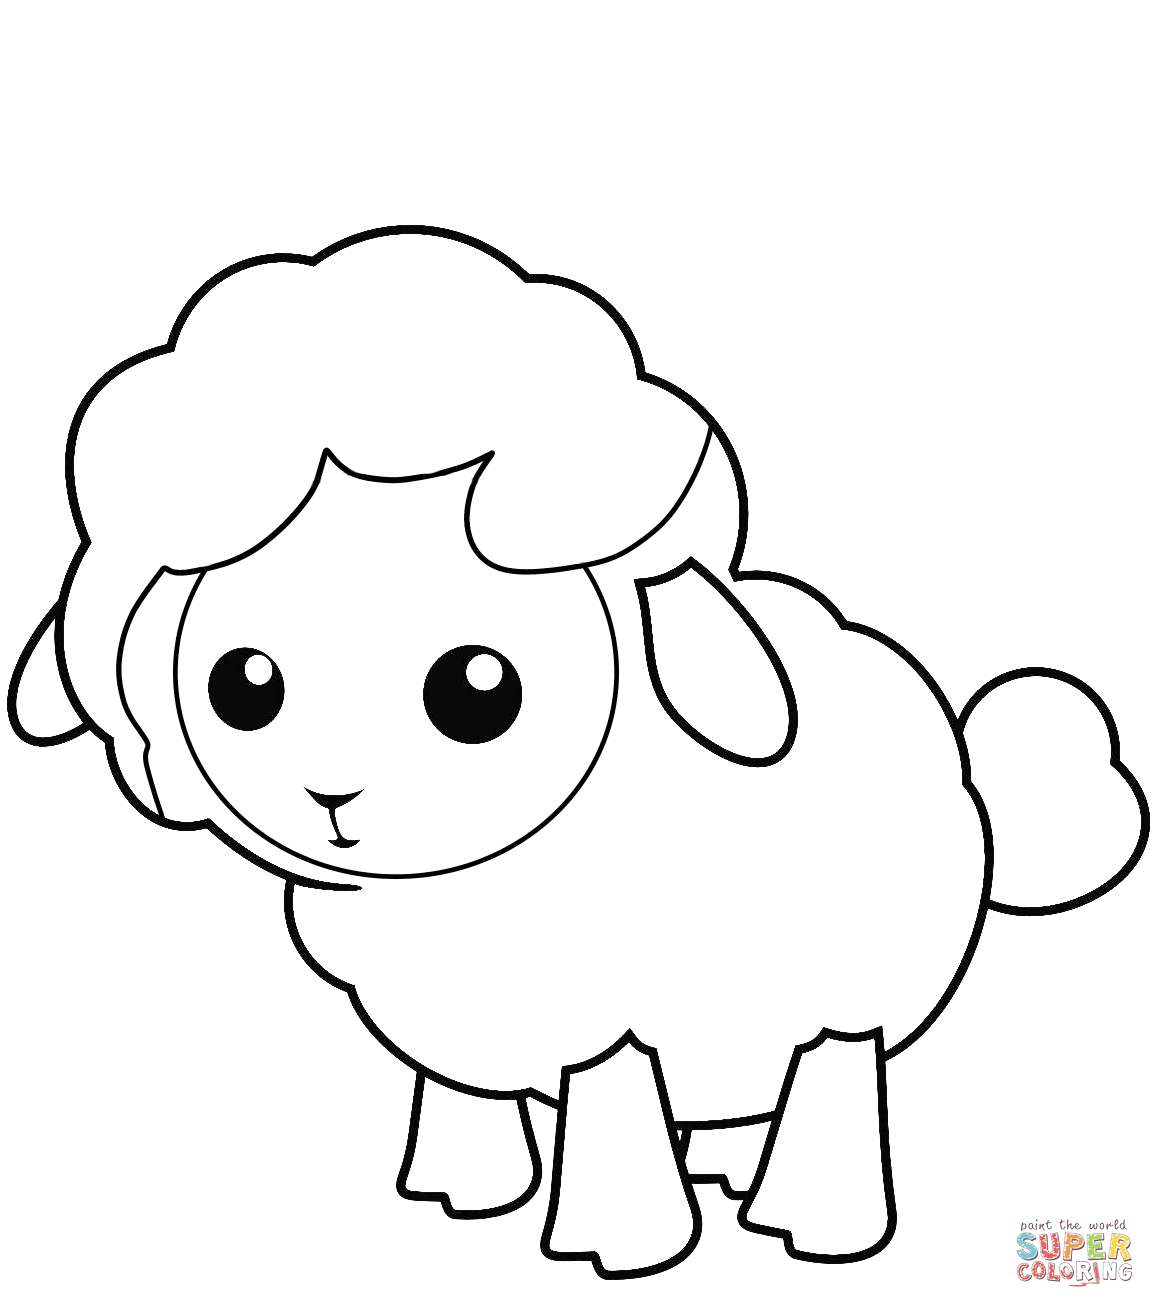 Cute little lamb coloring page free printable coloring pages